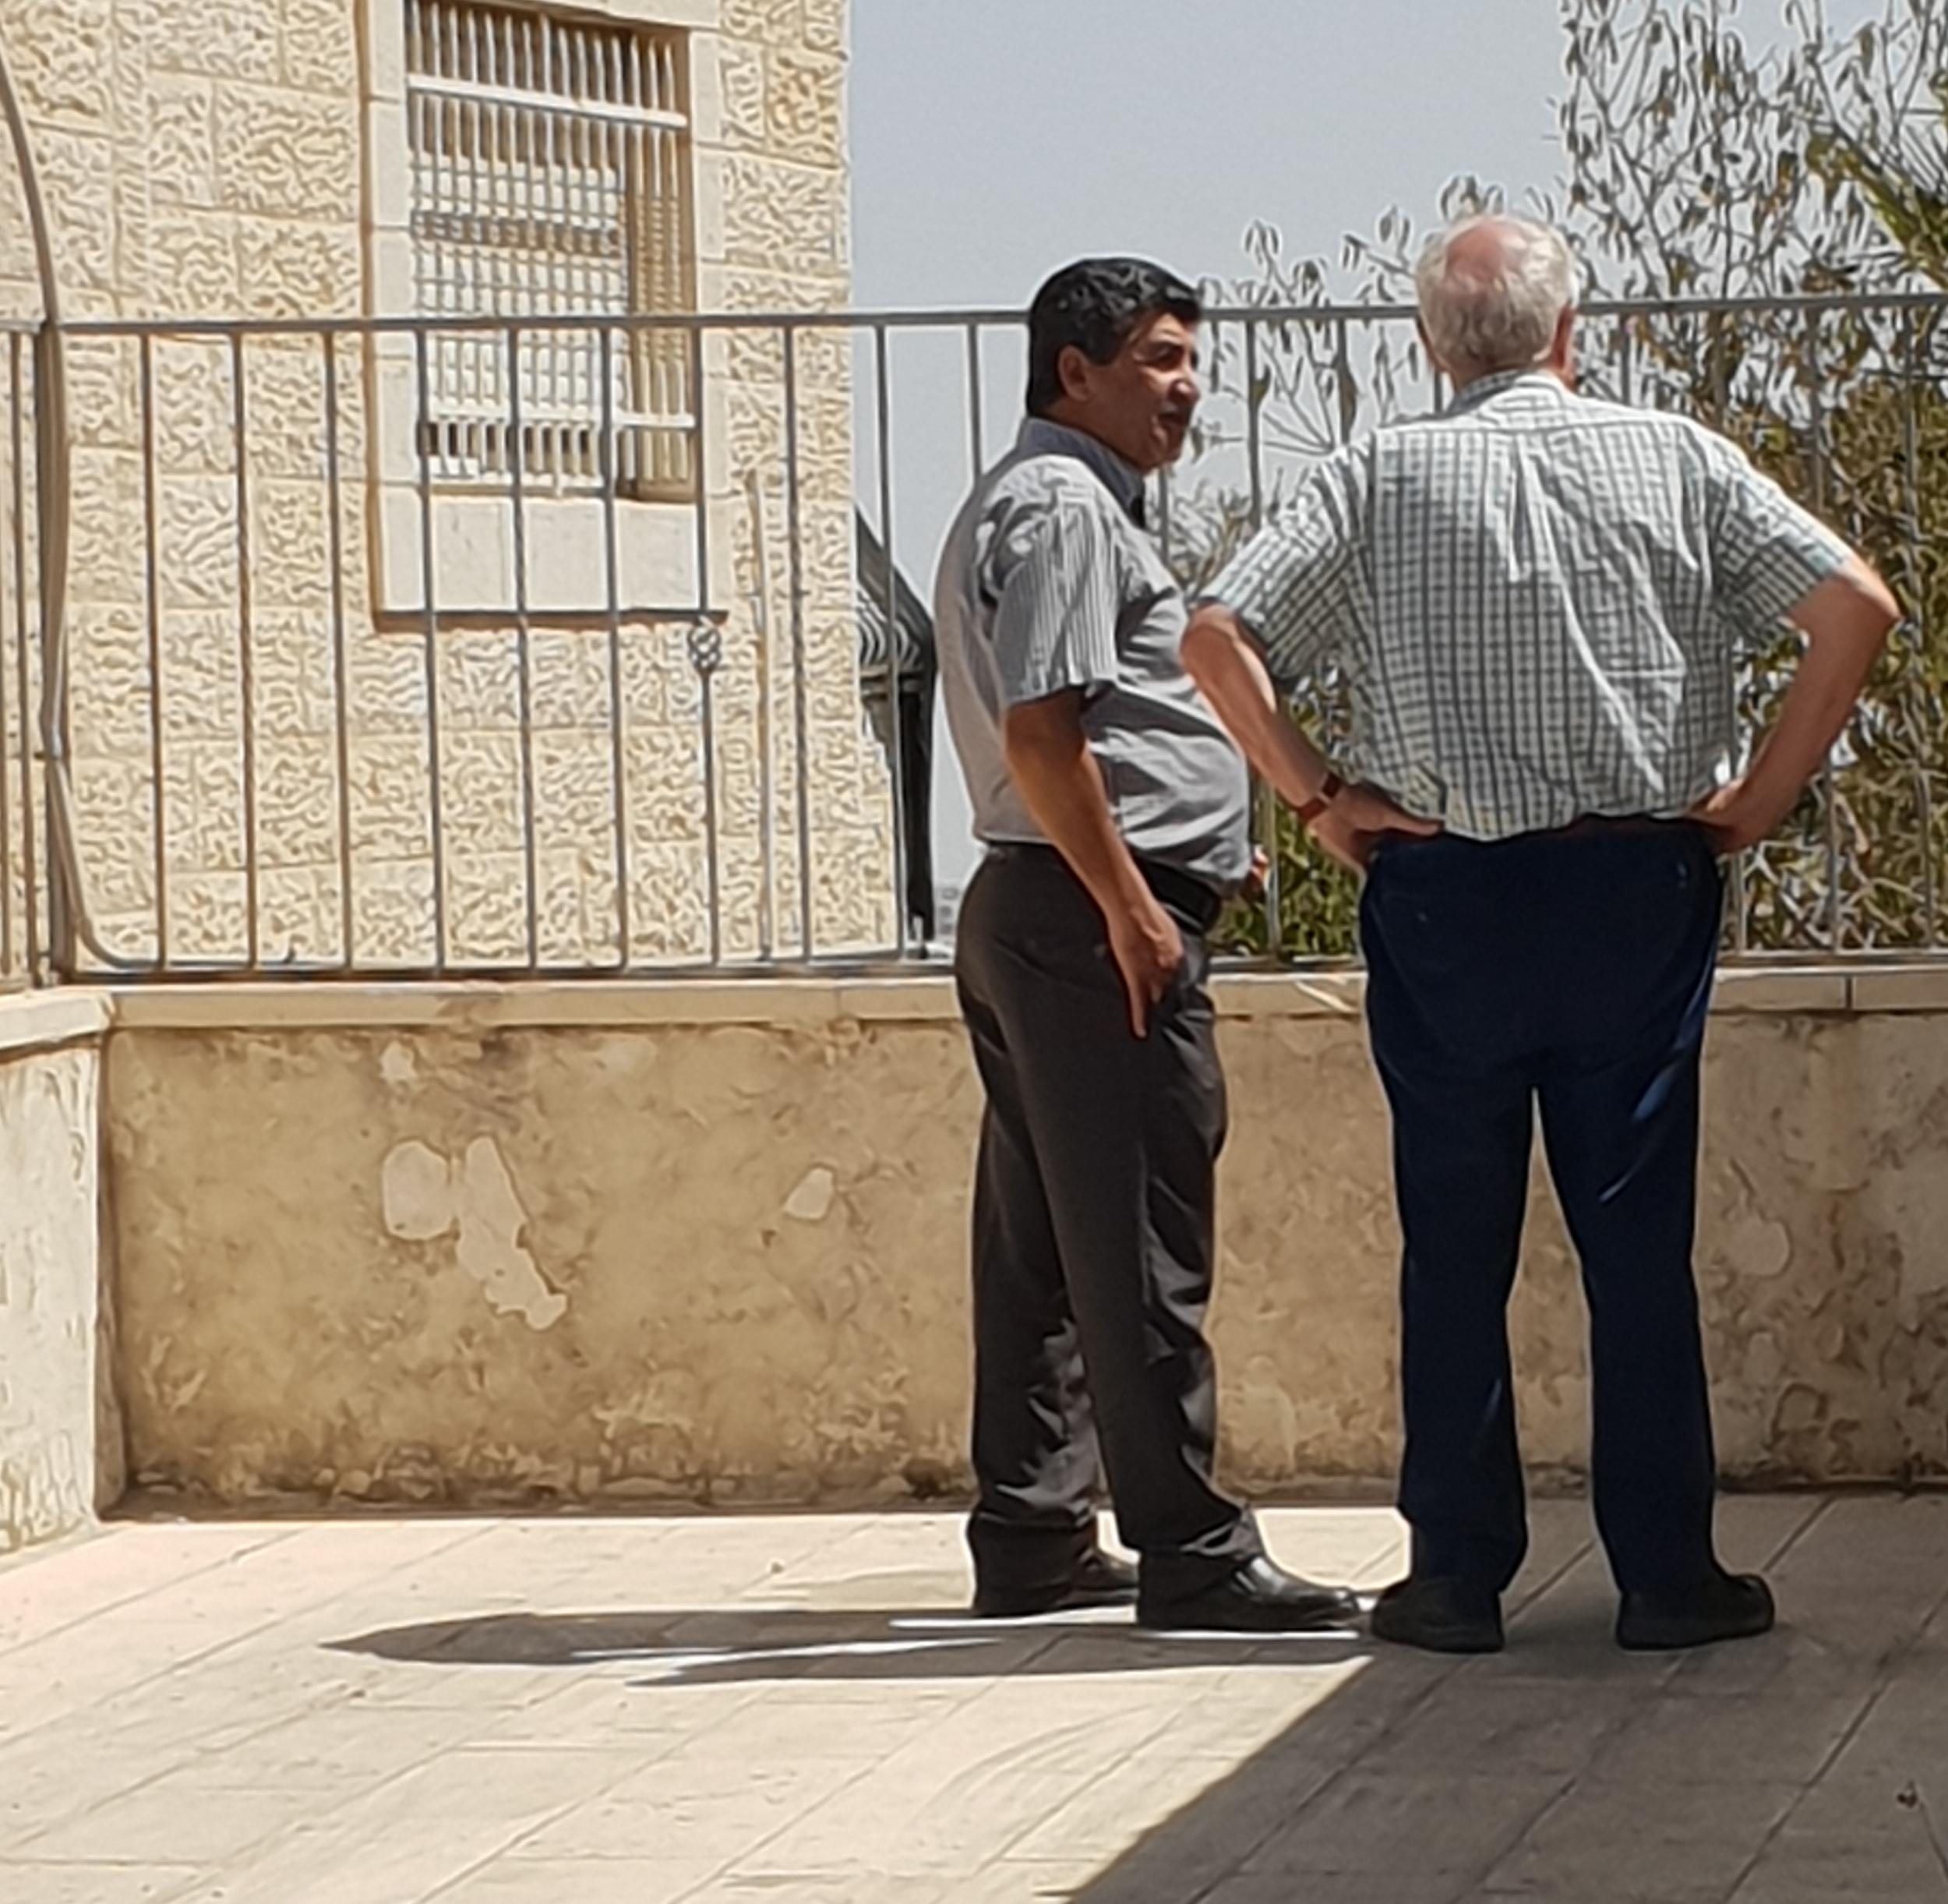 Palestinian Sulieman Khatib stands with The Independent’s Robert Fisk in the Israeli colony of Psgat Zeev, close to the site of the family land taken from them by Israel in 1993